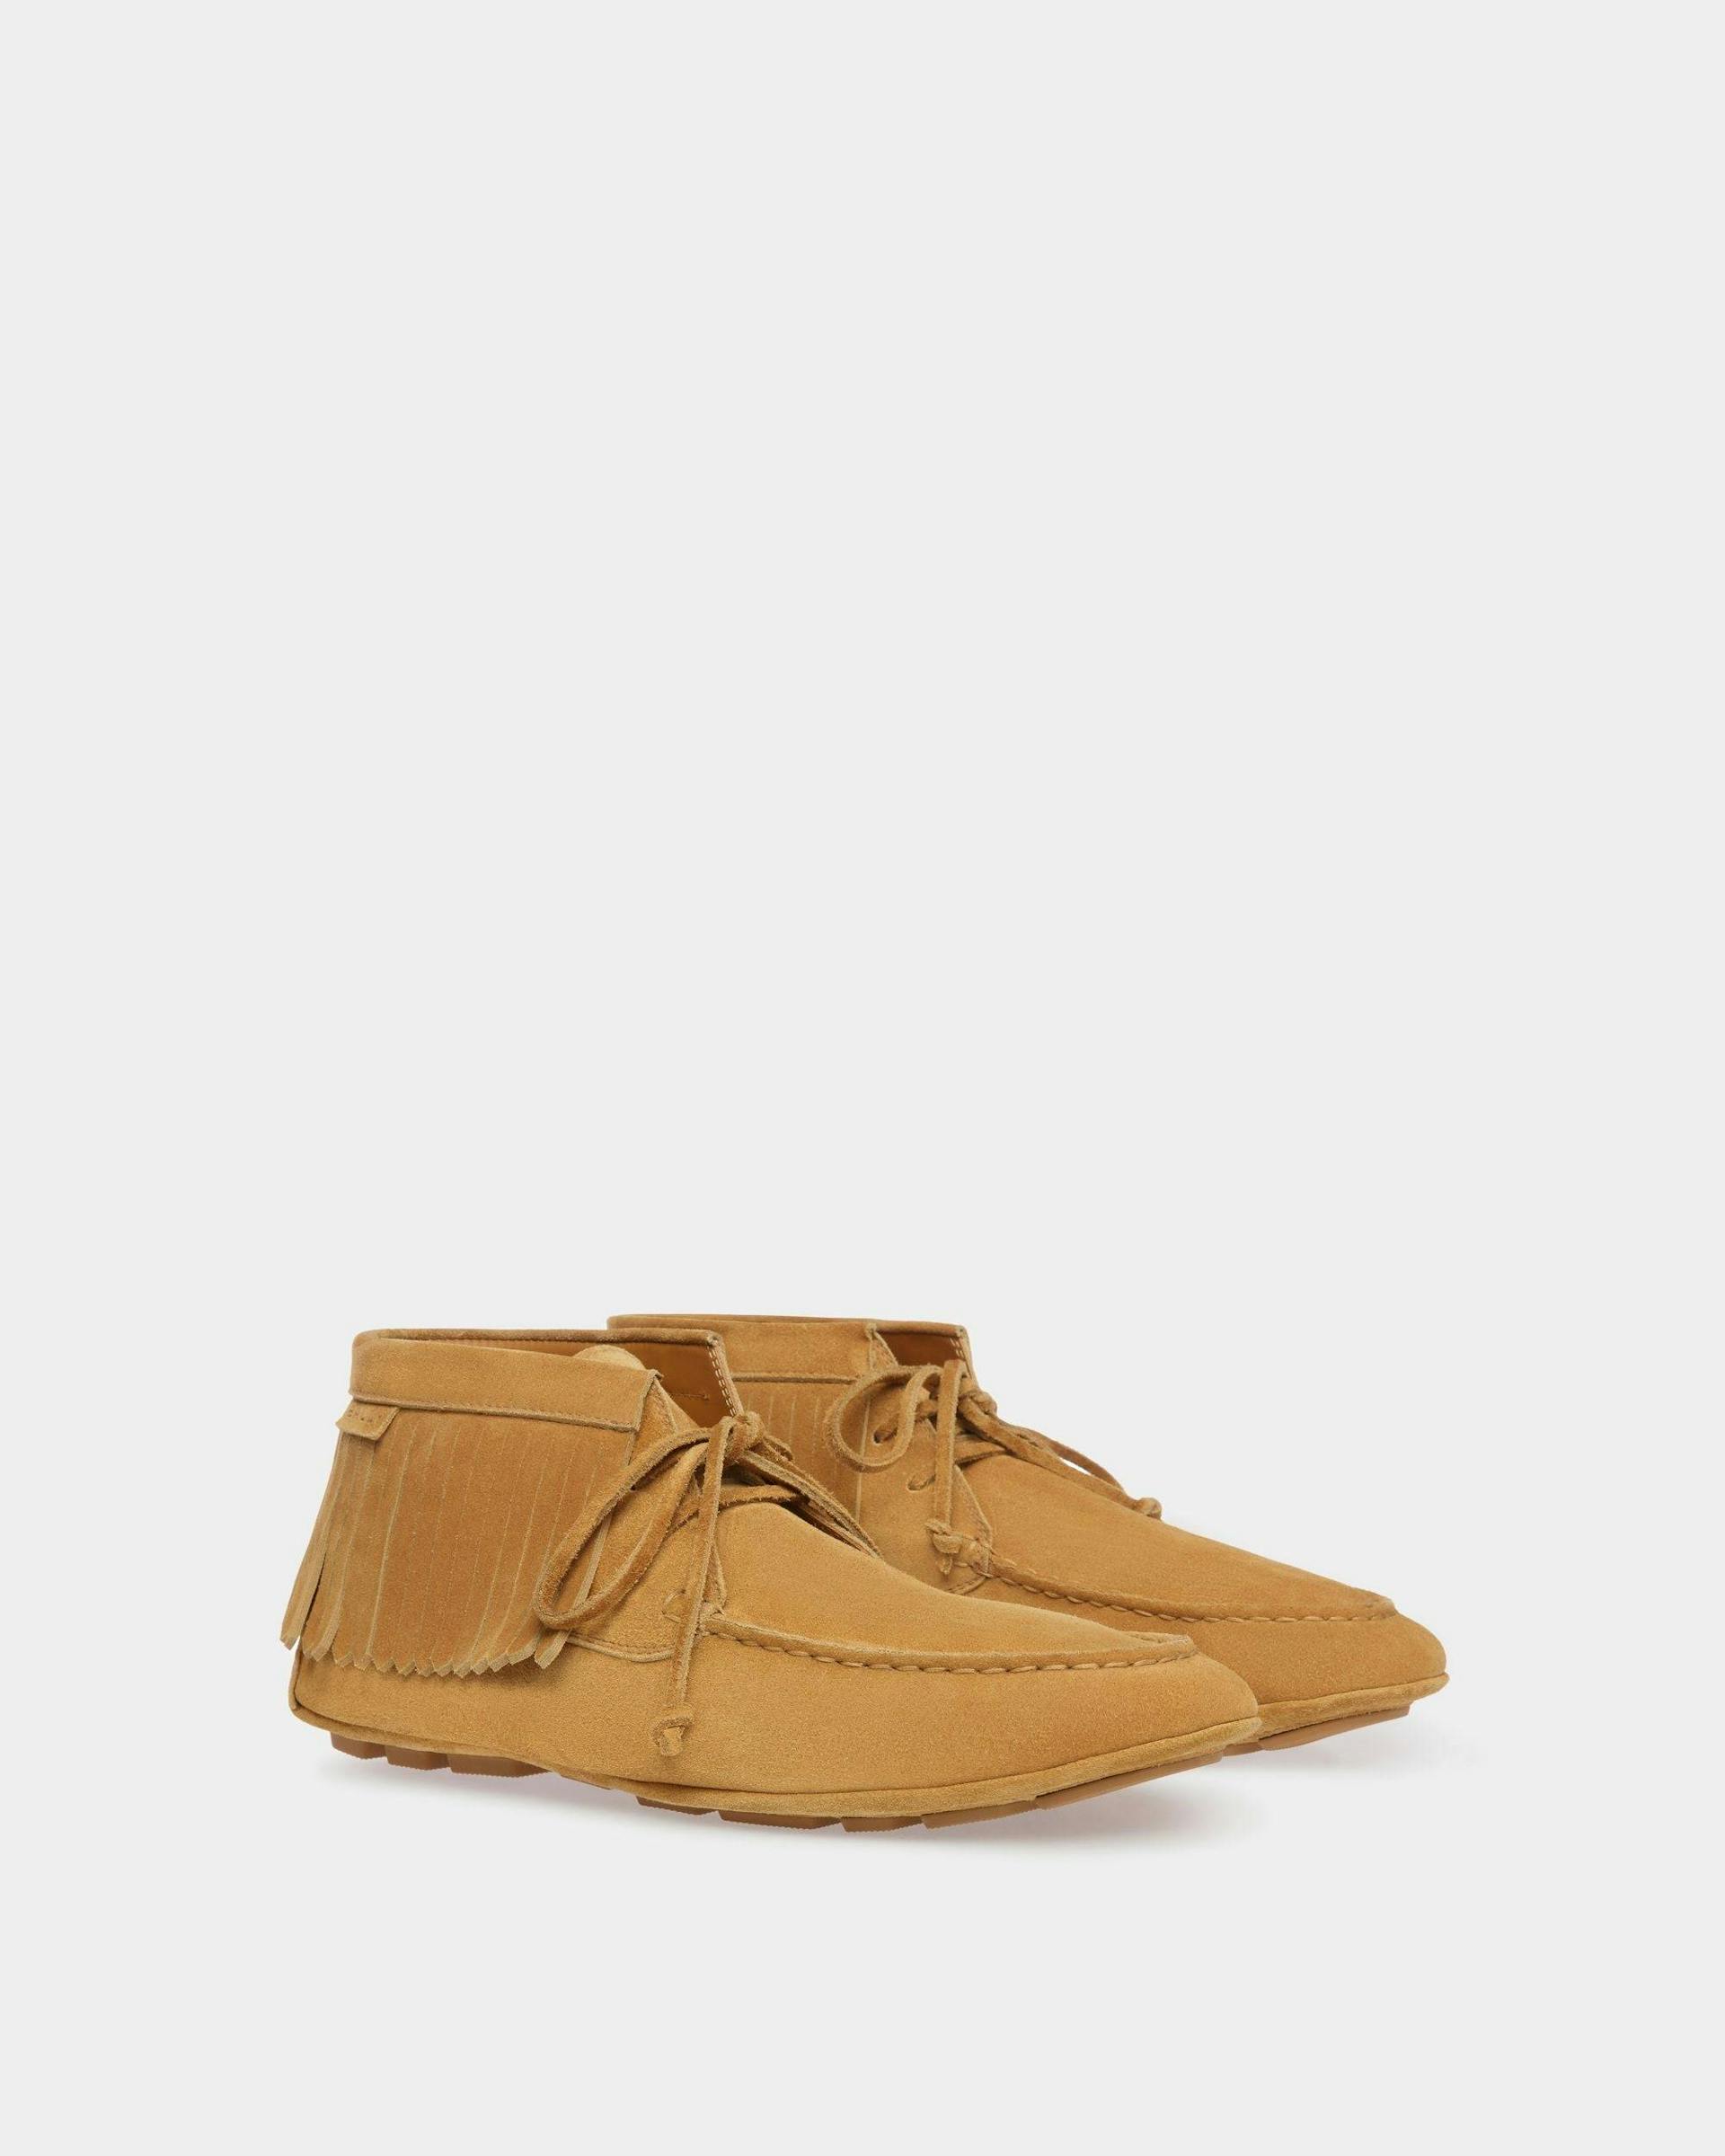 Men's Kerbs Driver Shoes In Desert Leather | Bally | Still Life 3/4 Front